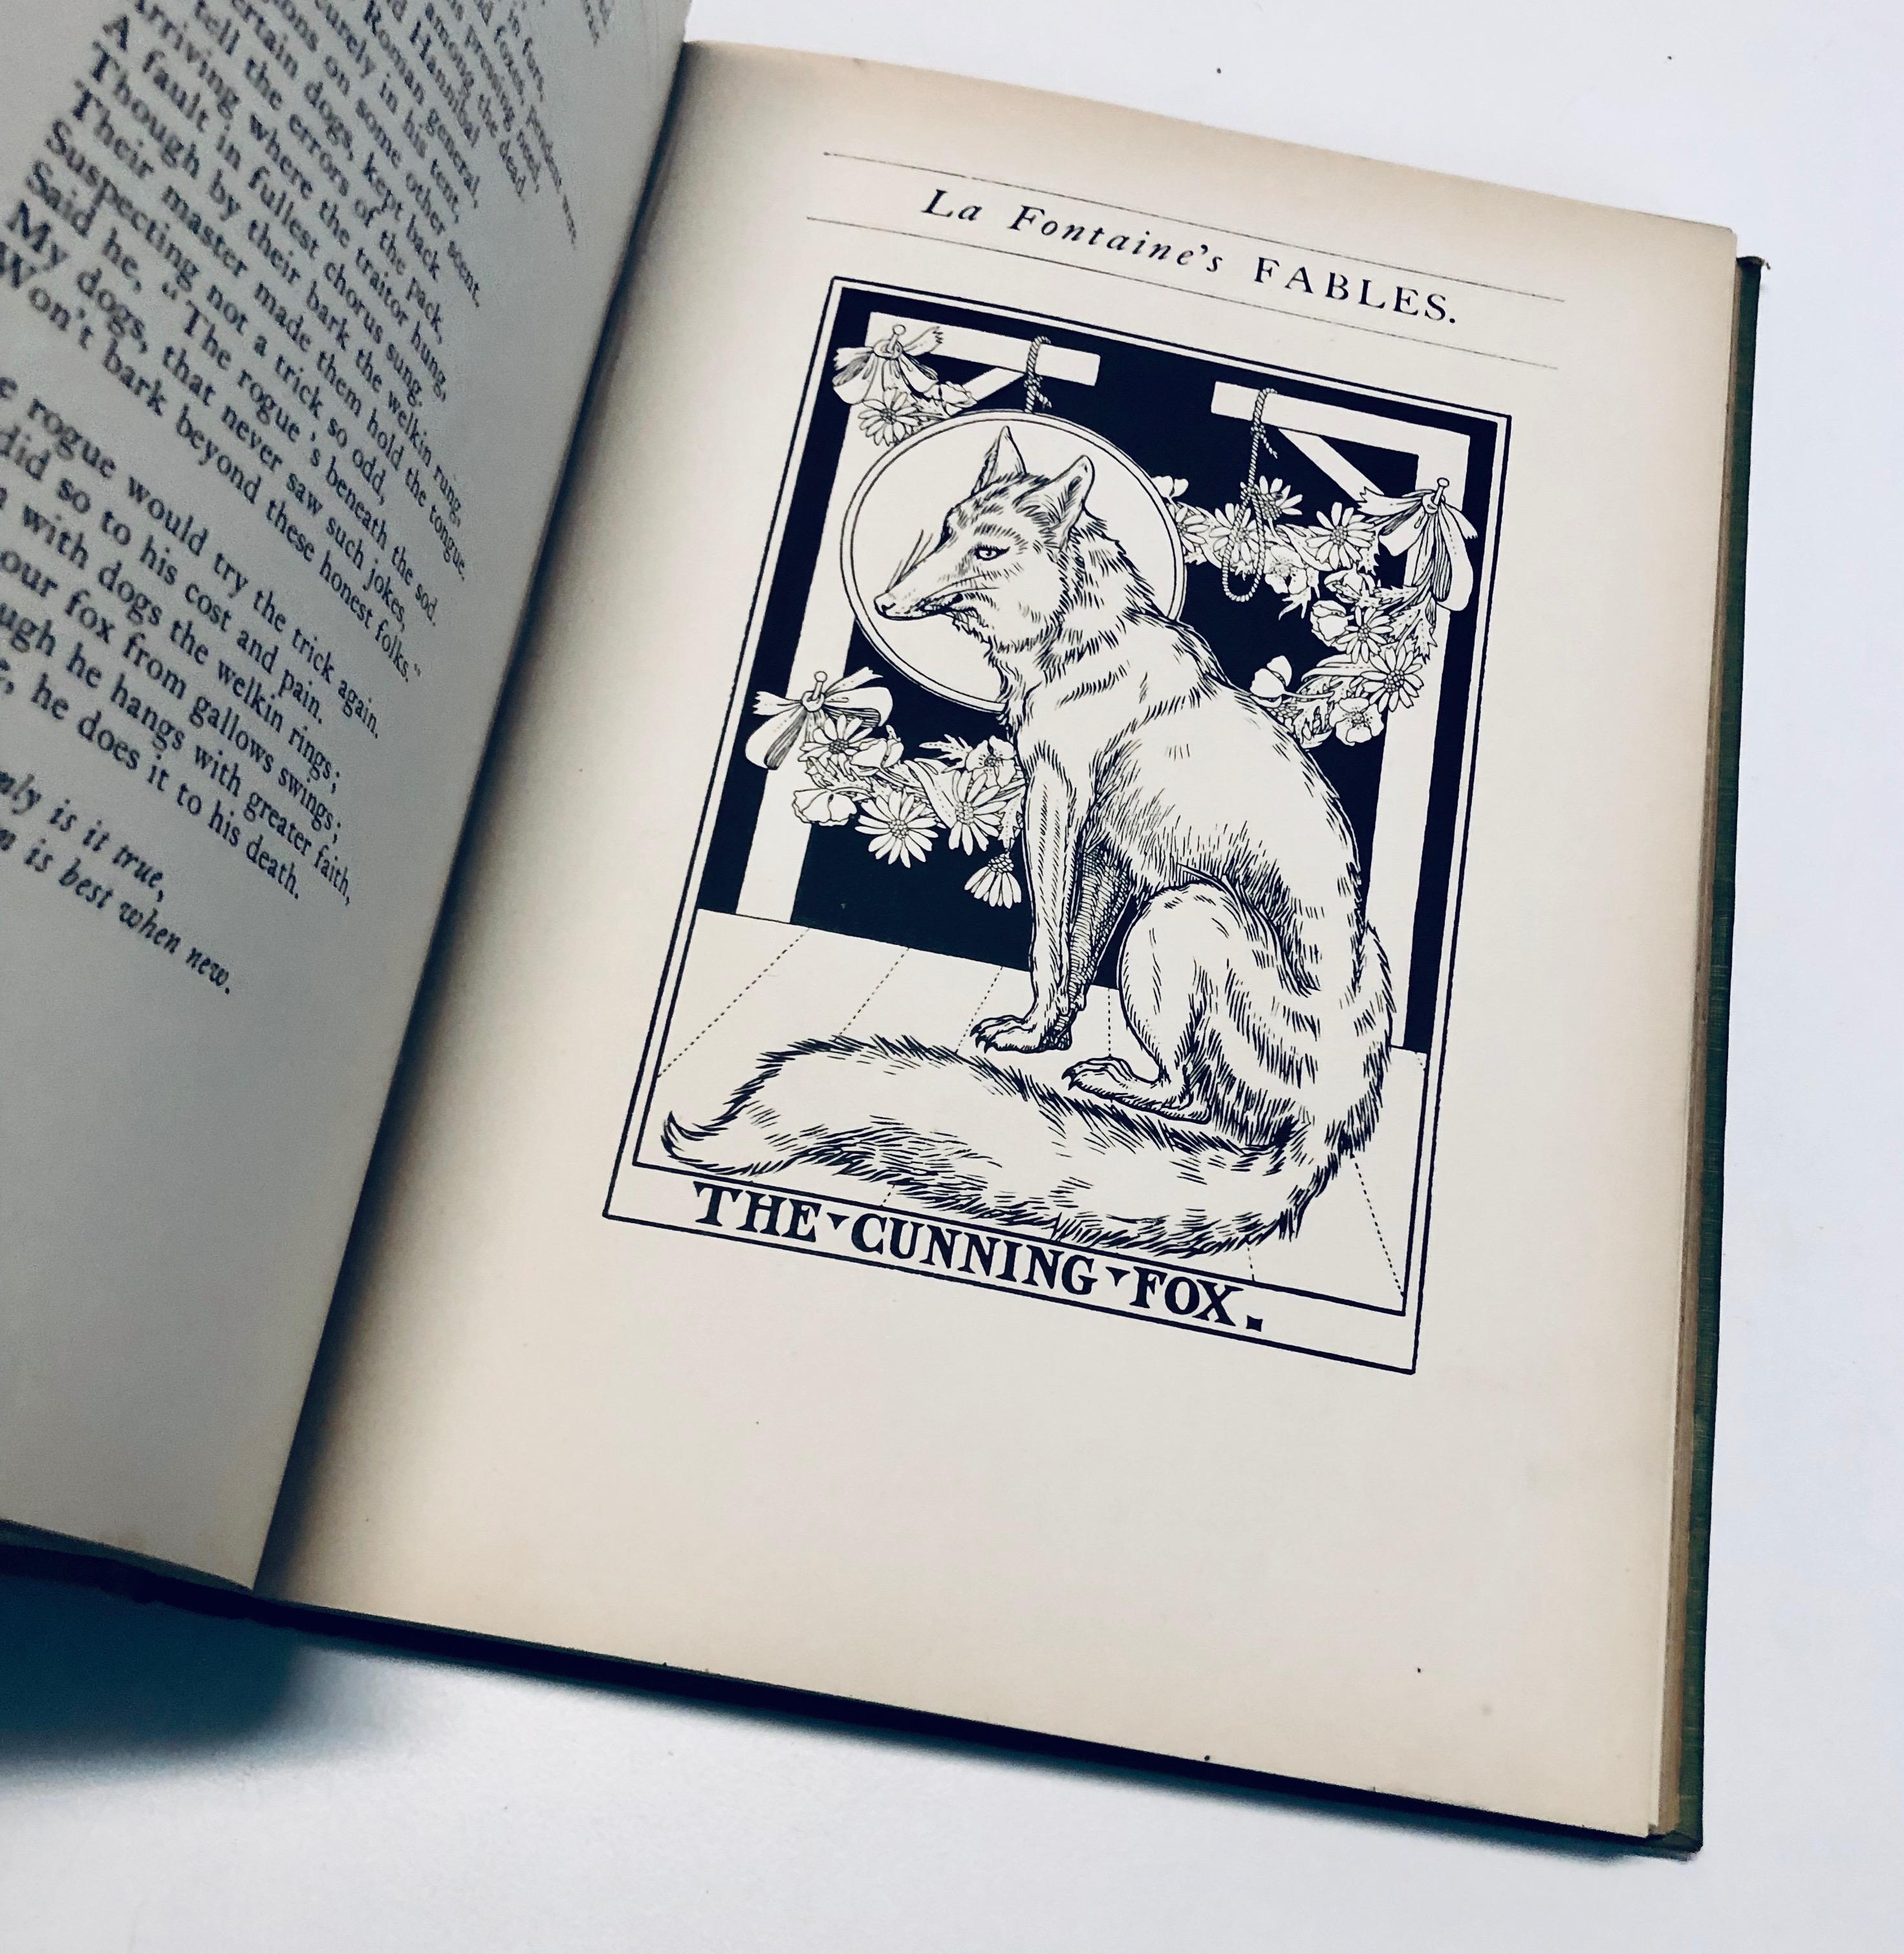 RARE A Hundred Fables of La Fontaine (1900) Illustrations by Percy J. Billinghurst